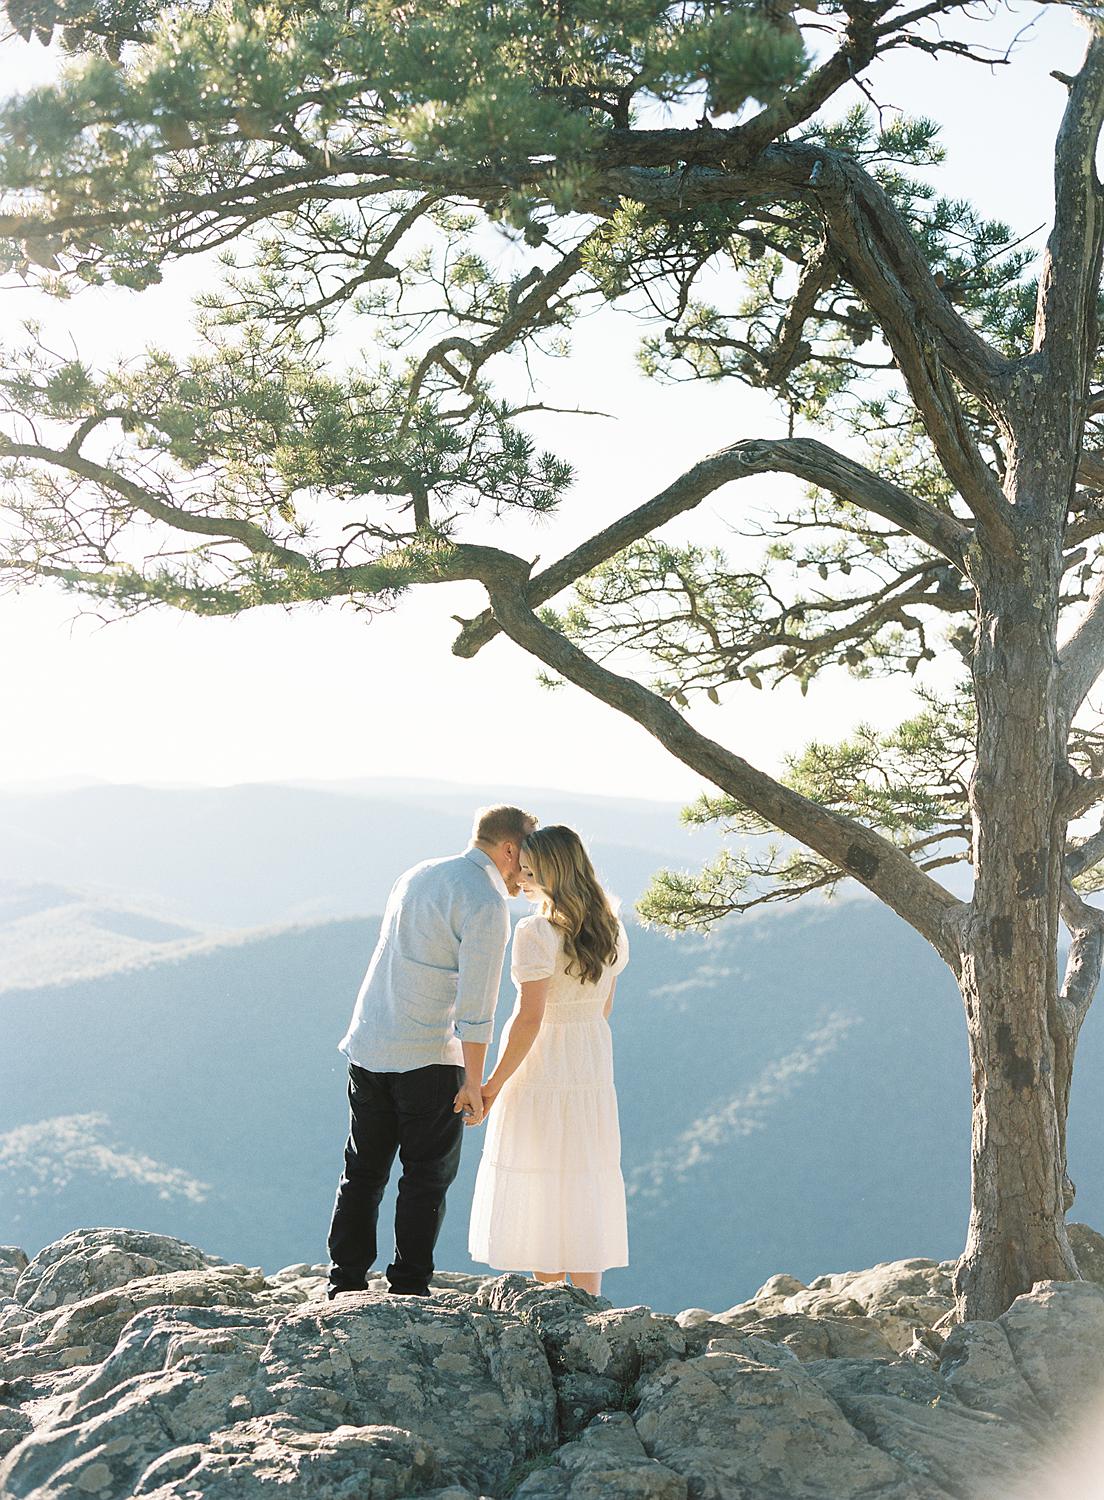 Groom leans in to whisper something in brides ear as they over look The Blue Ridge Mountains during their engagement session at Ravens Roost.